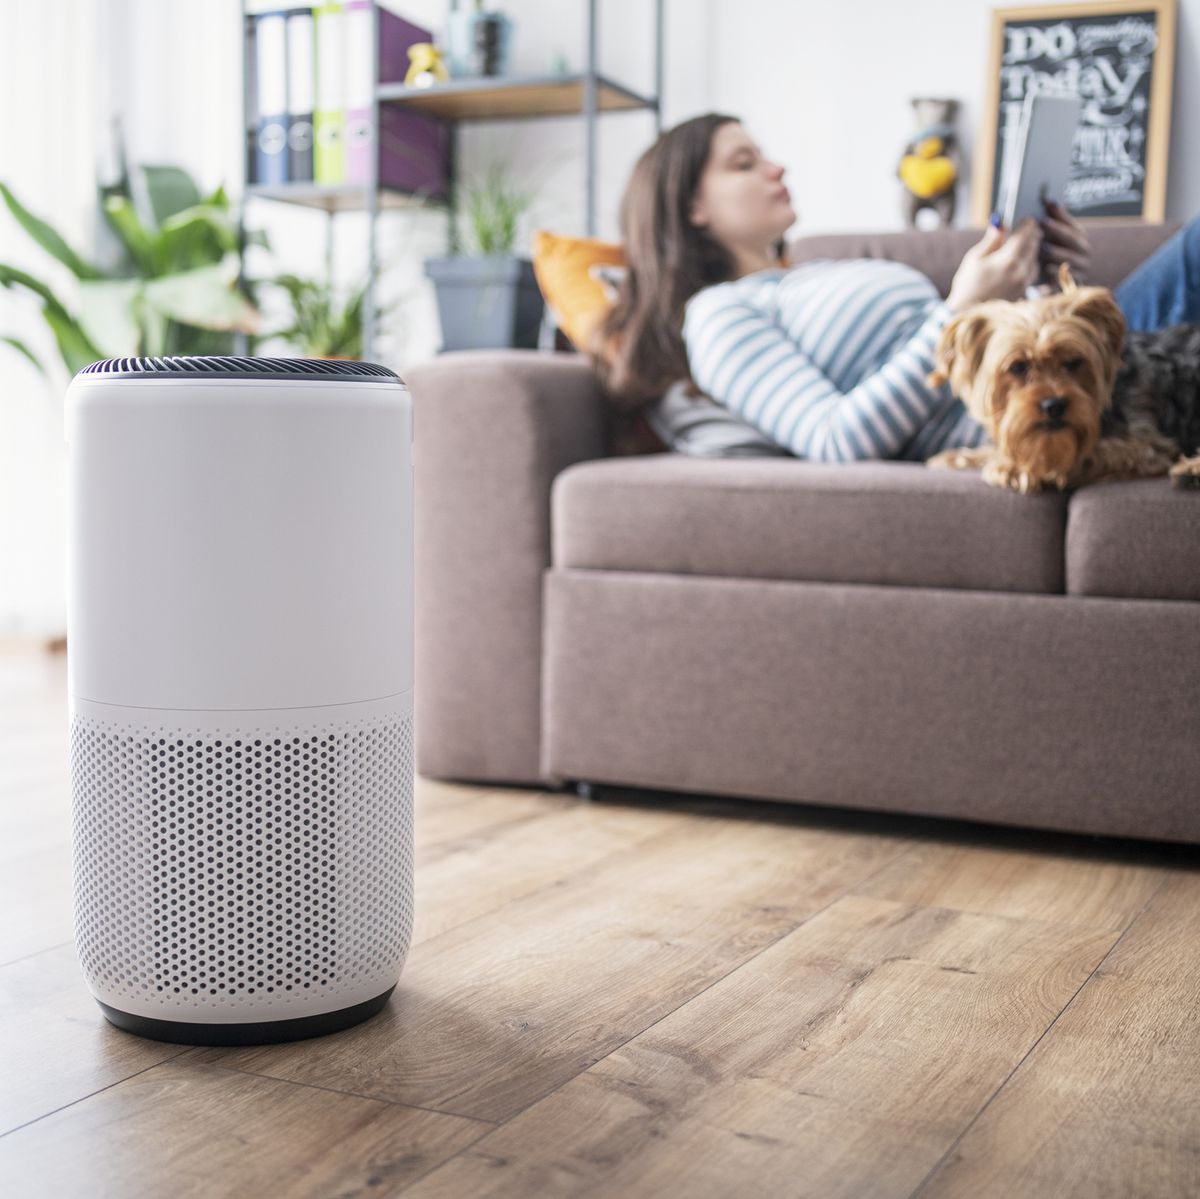 Does your pet need an air purifier? - The Good Guys